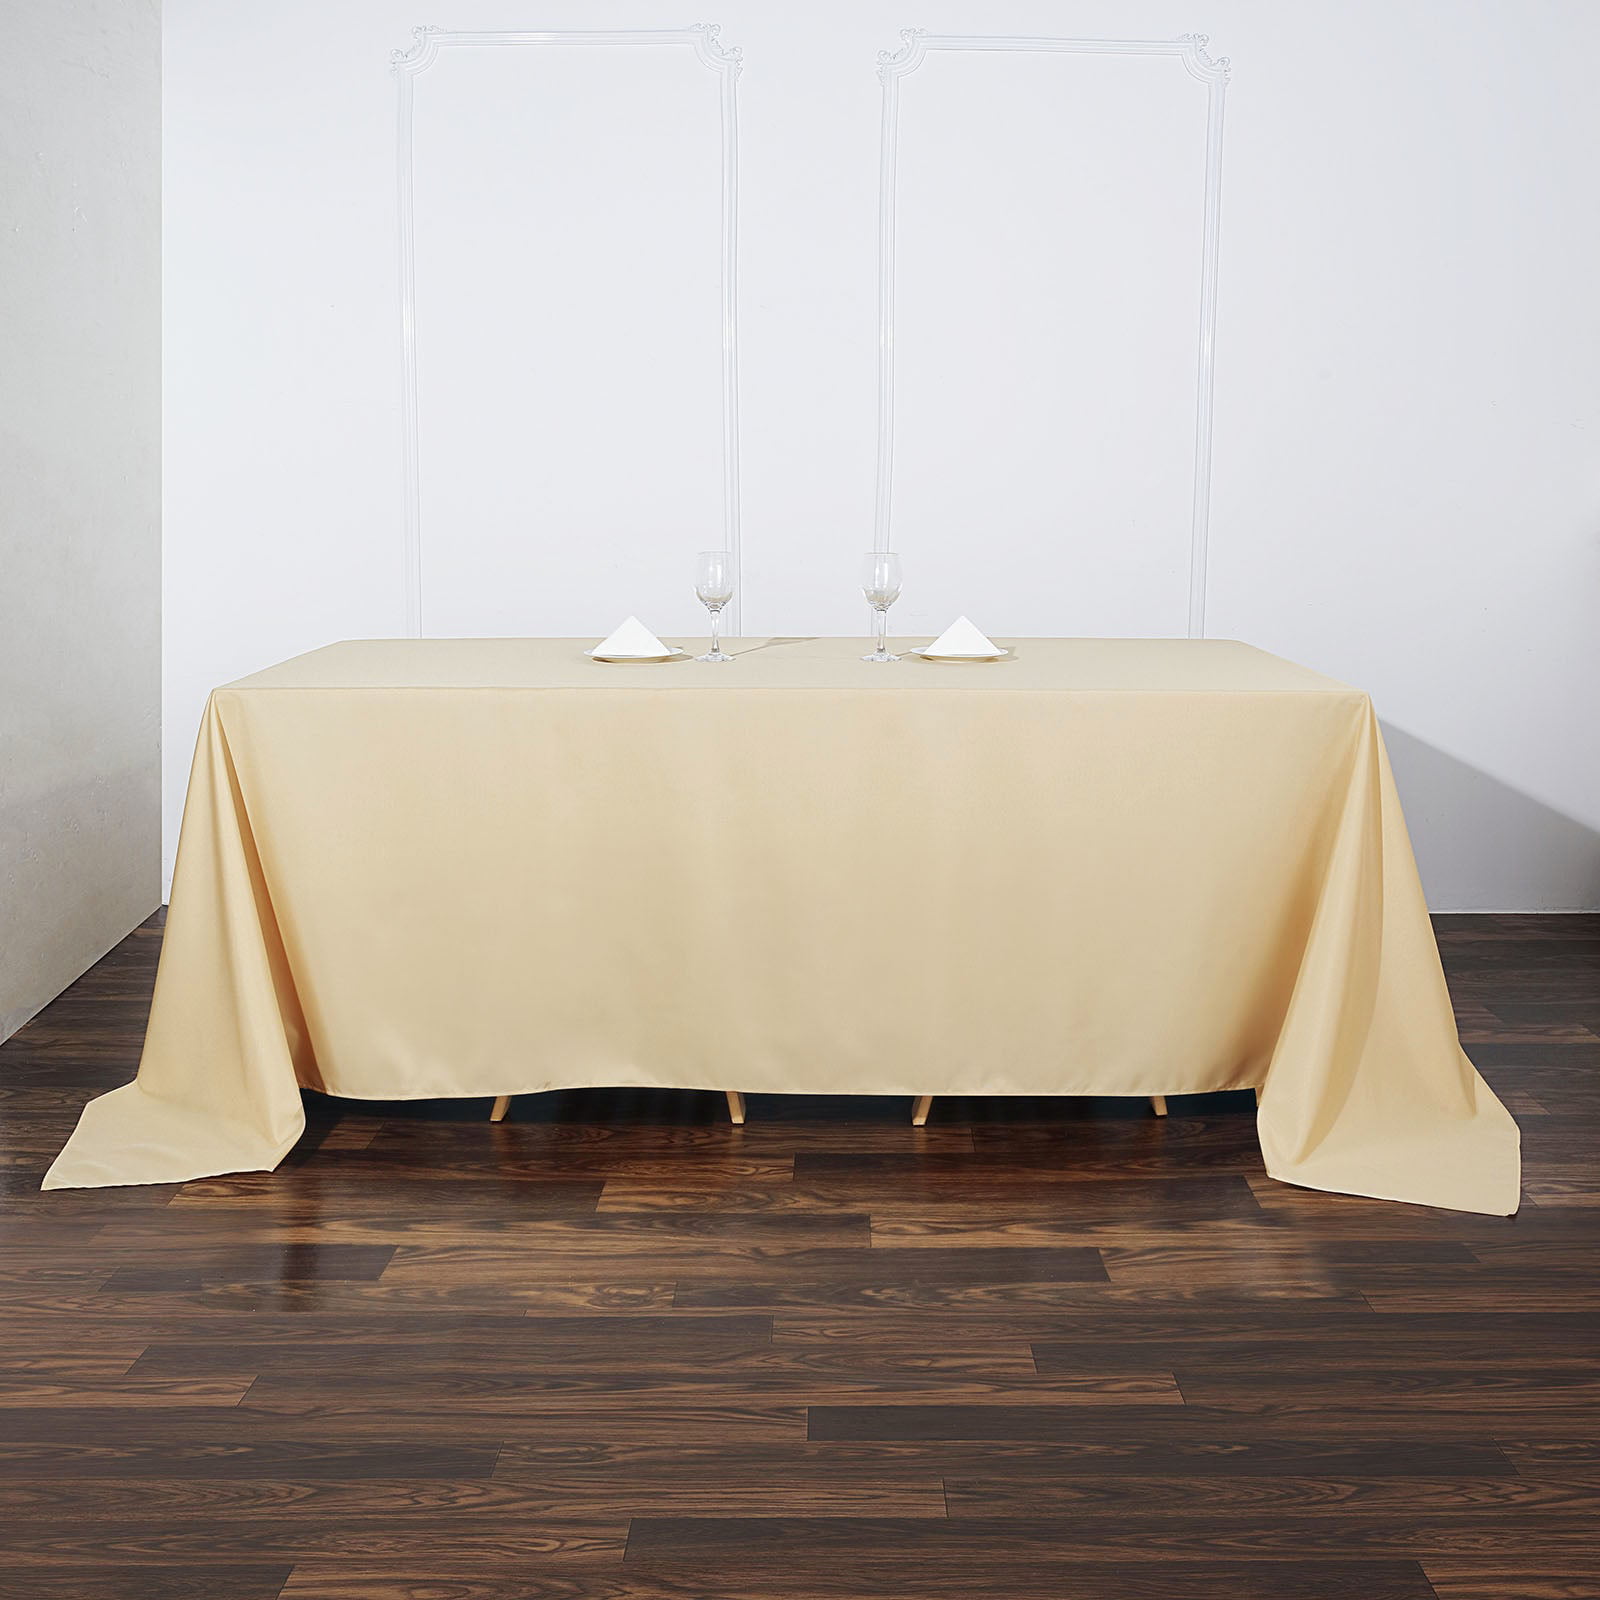 3D Polyester Tablecloth cloth Dining Kitchen Table Cover Protector Washable NEW 